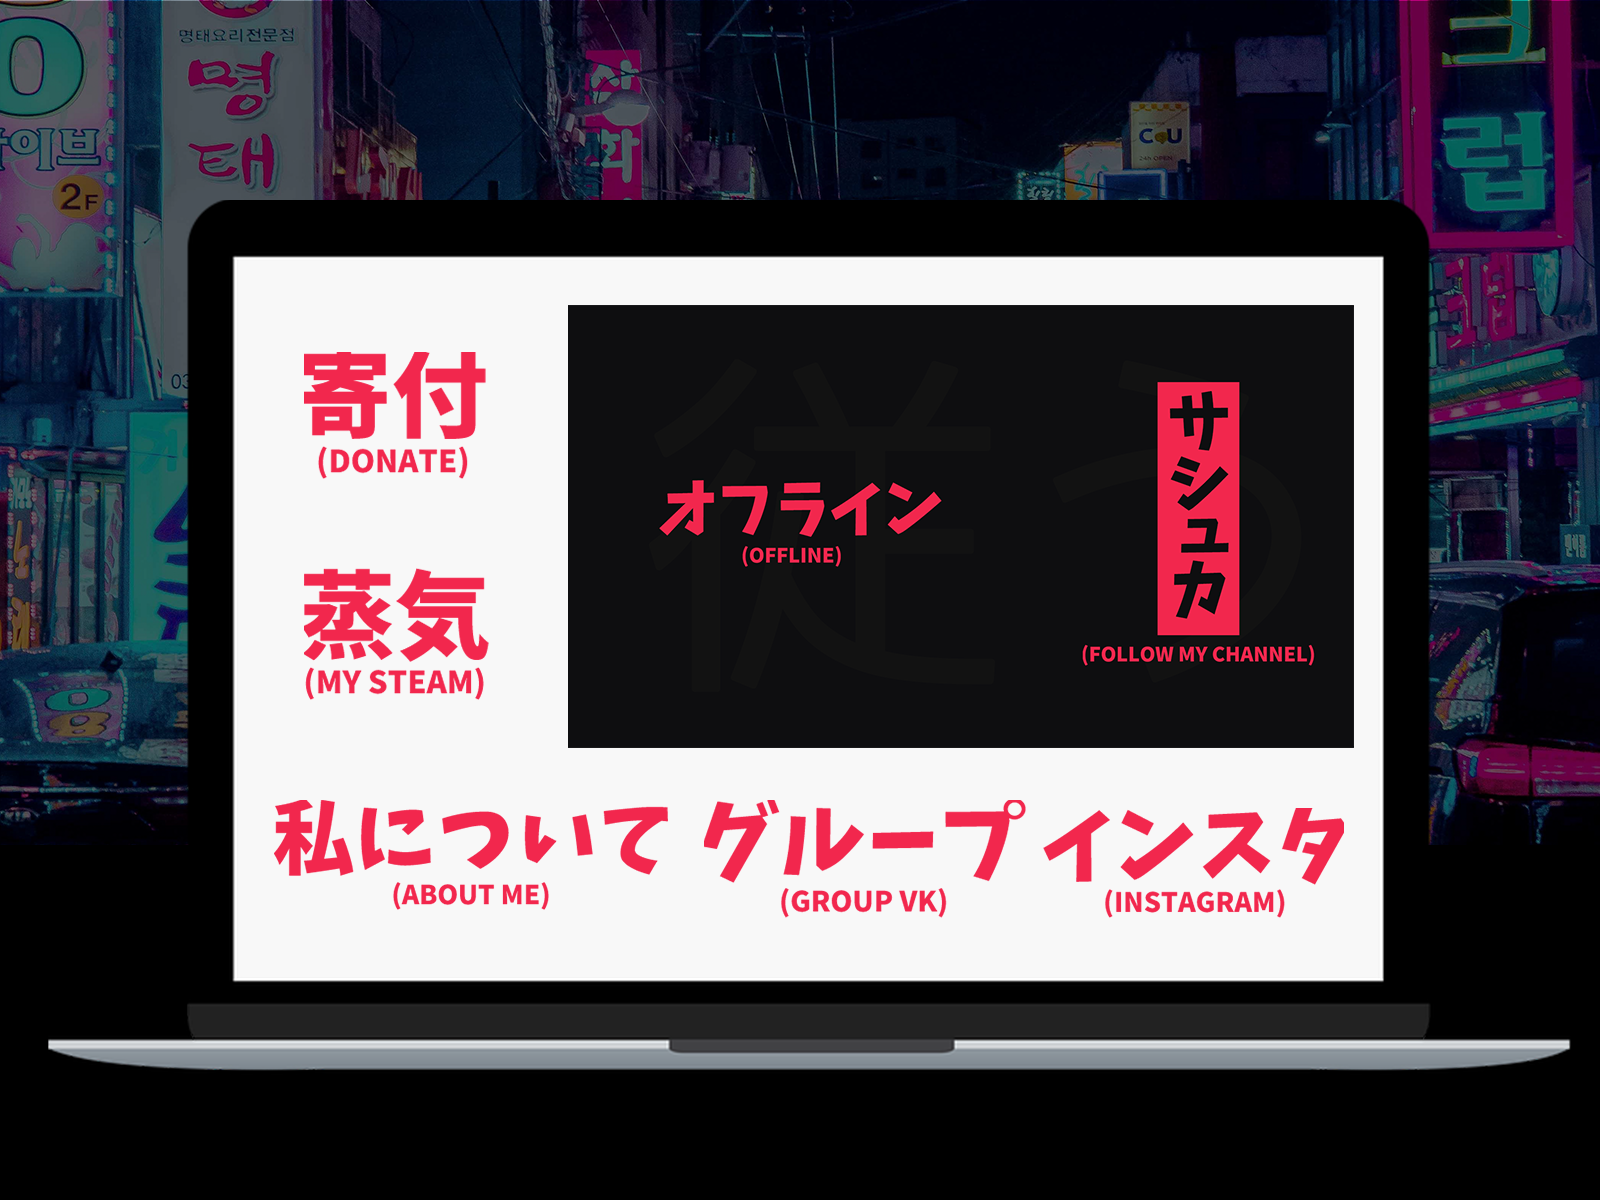 Twitch Japan Concept By Alexandr Evstratov On Dribbble